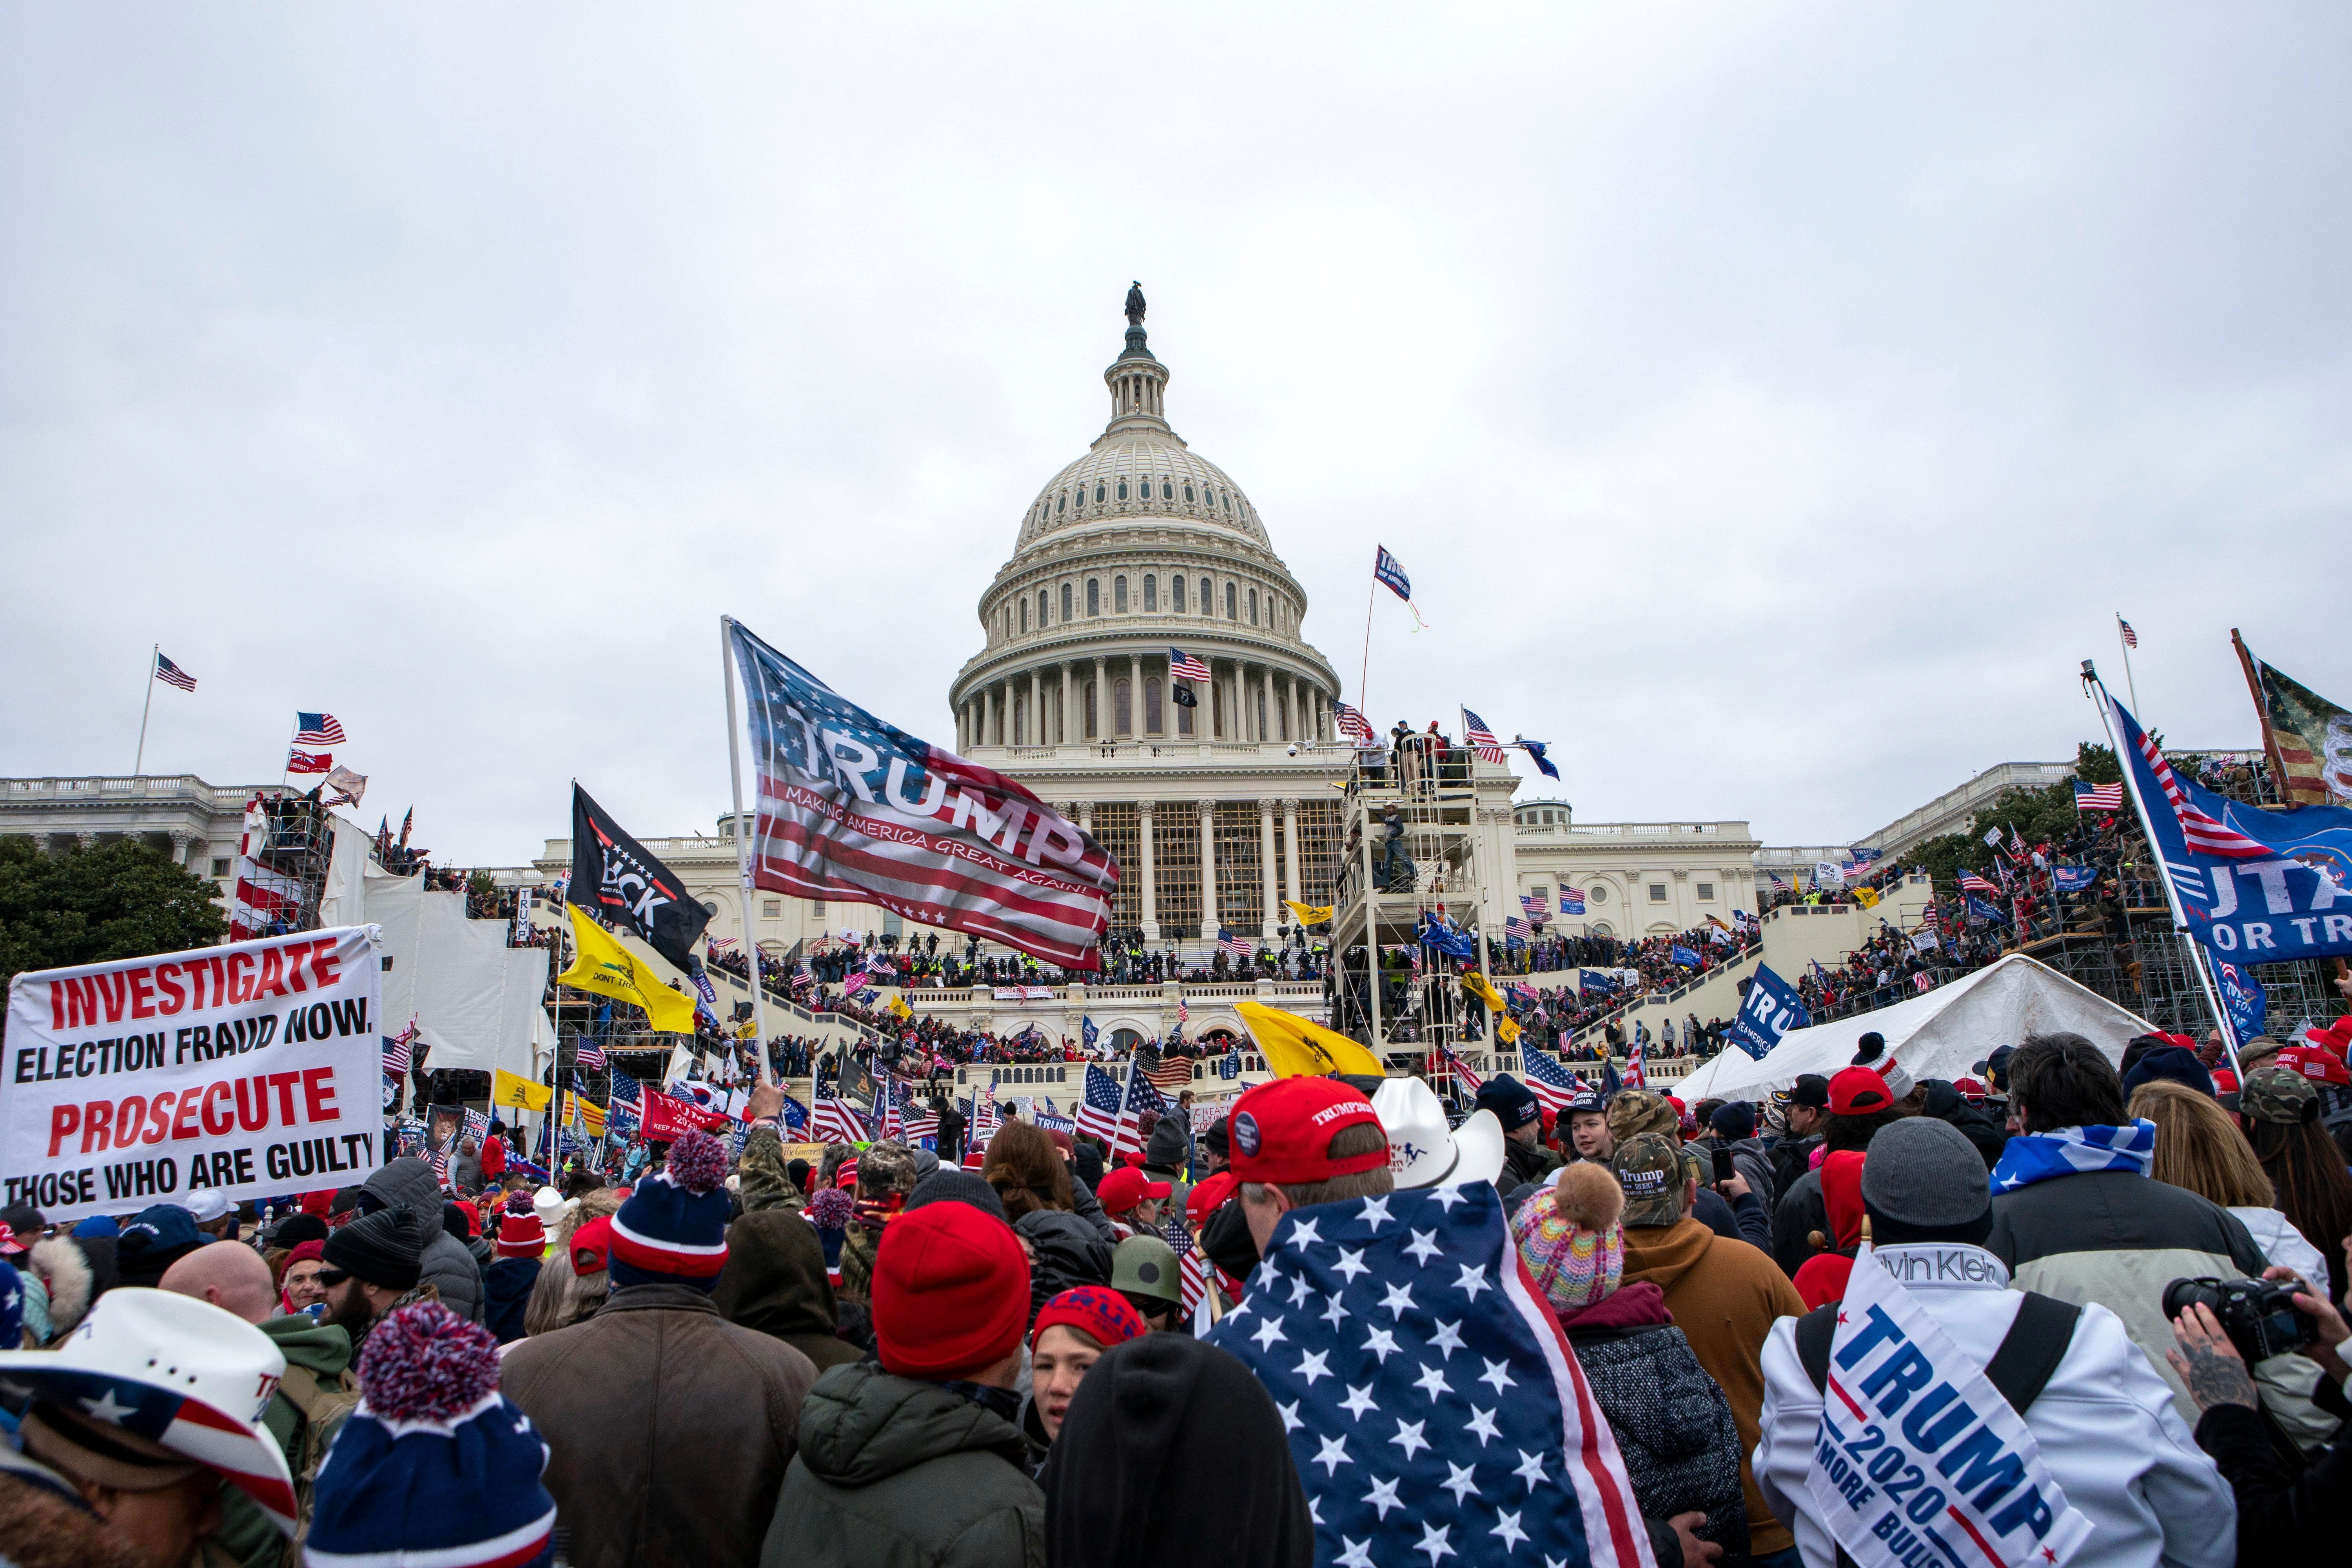 Trump supporters storm the US Capitol on January 6 2021